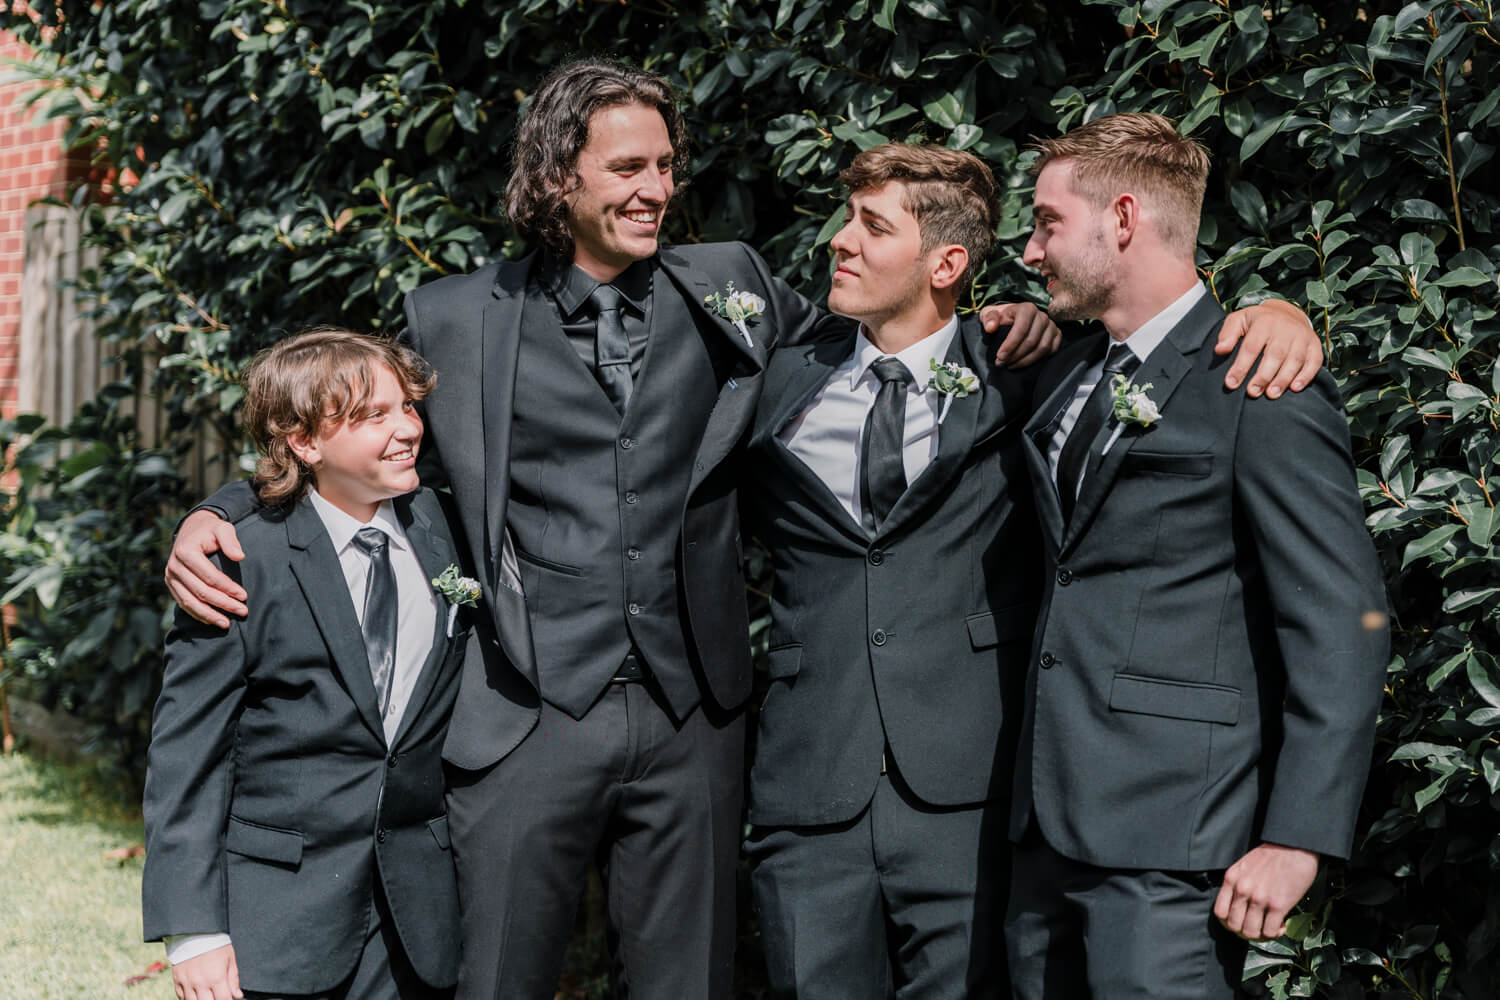 Groom with his brothers, photo captured by Black Avenue Production